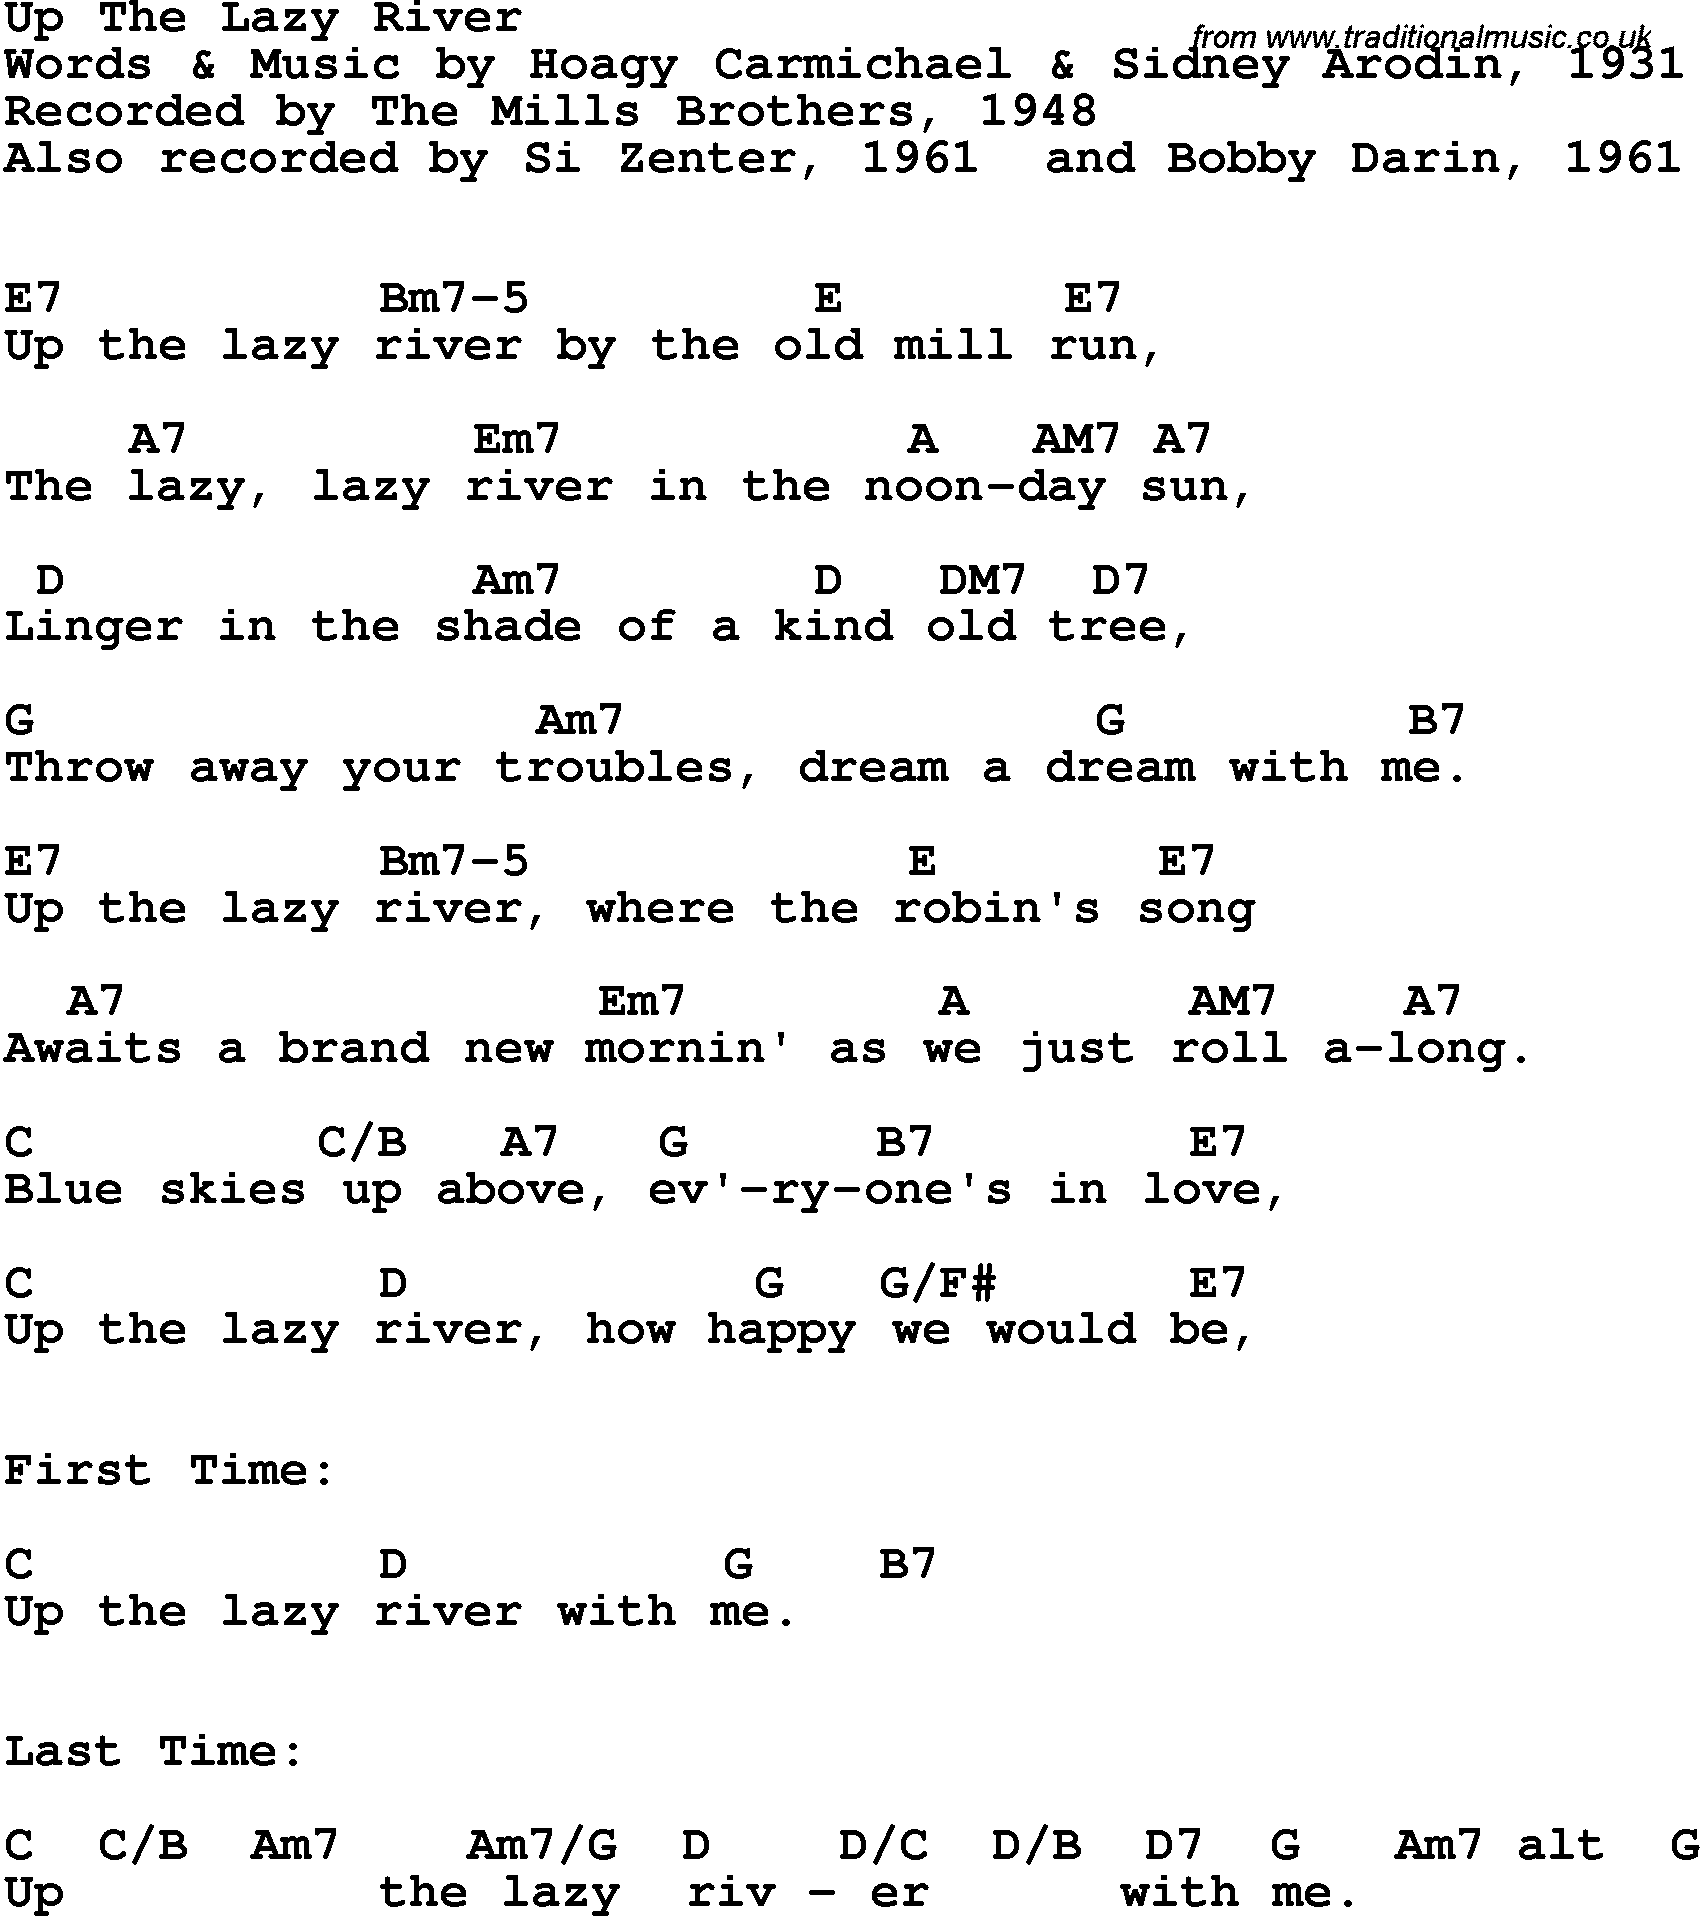 Song Lyrics with guitar chords for Up The Lazy River - The Mills Brothers, 1948